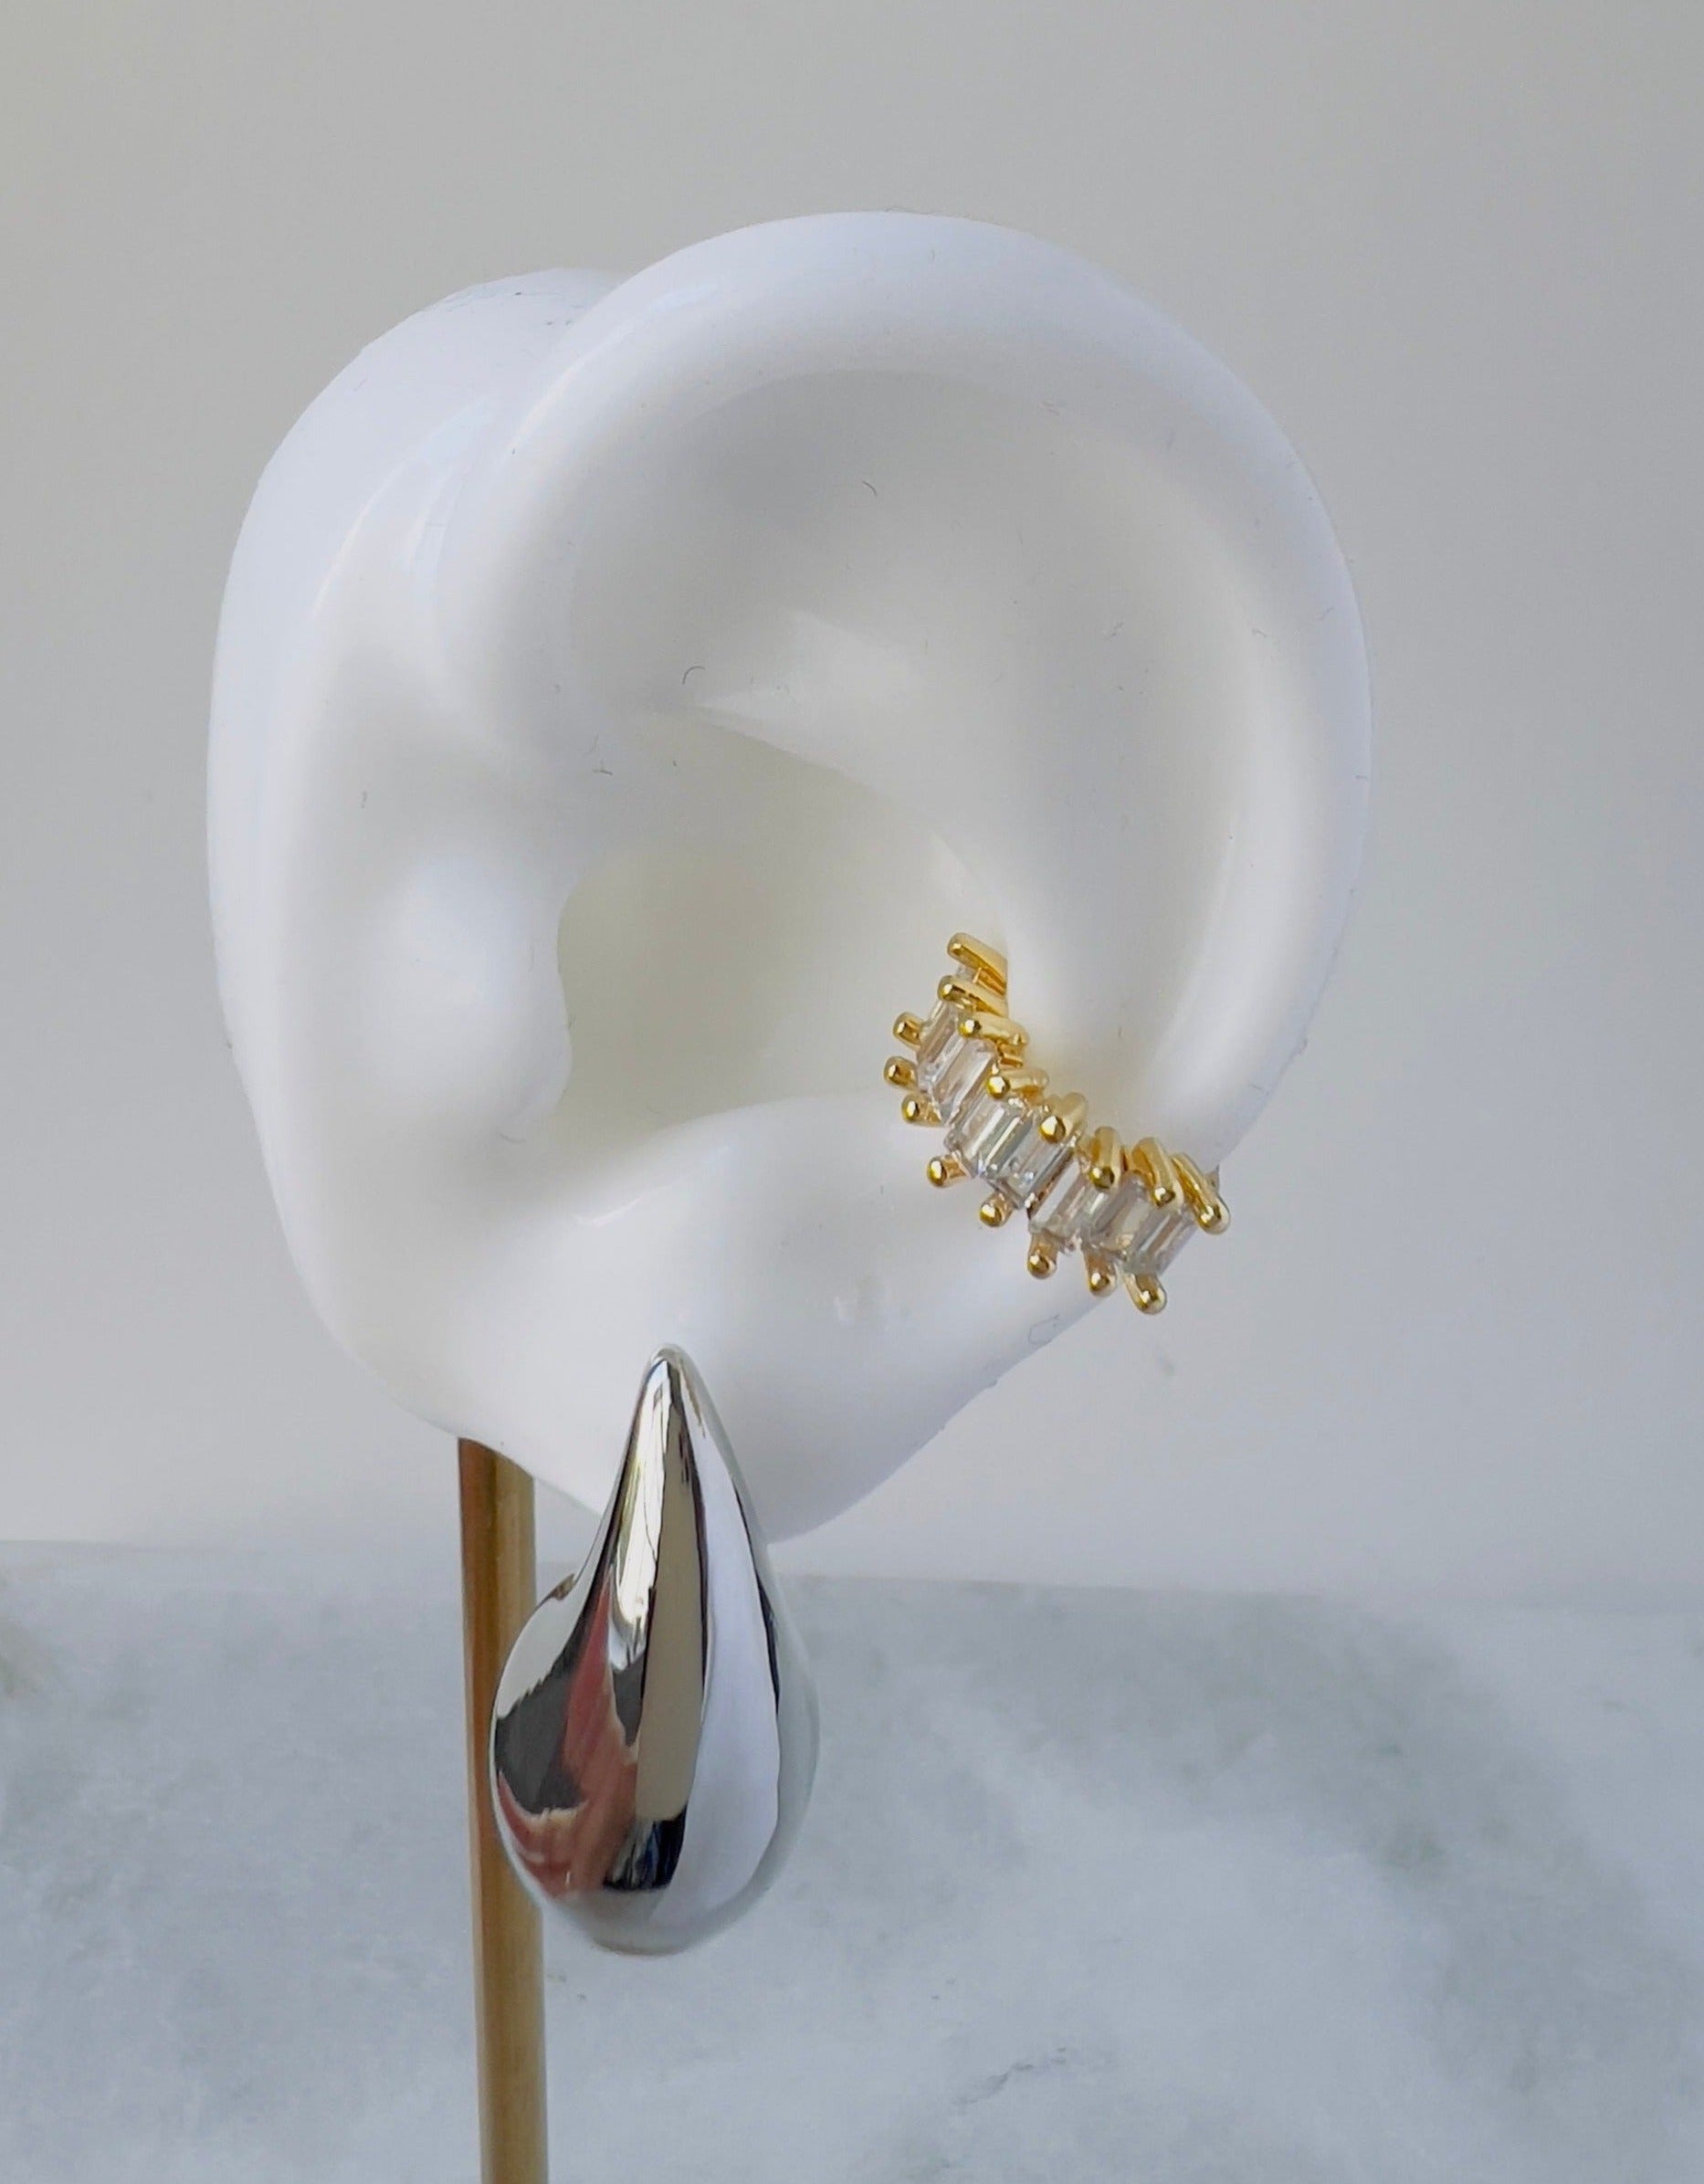 Zirconia ear cuff with gold plated frame in a white ear with a long silver drop earring